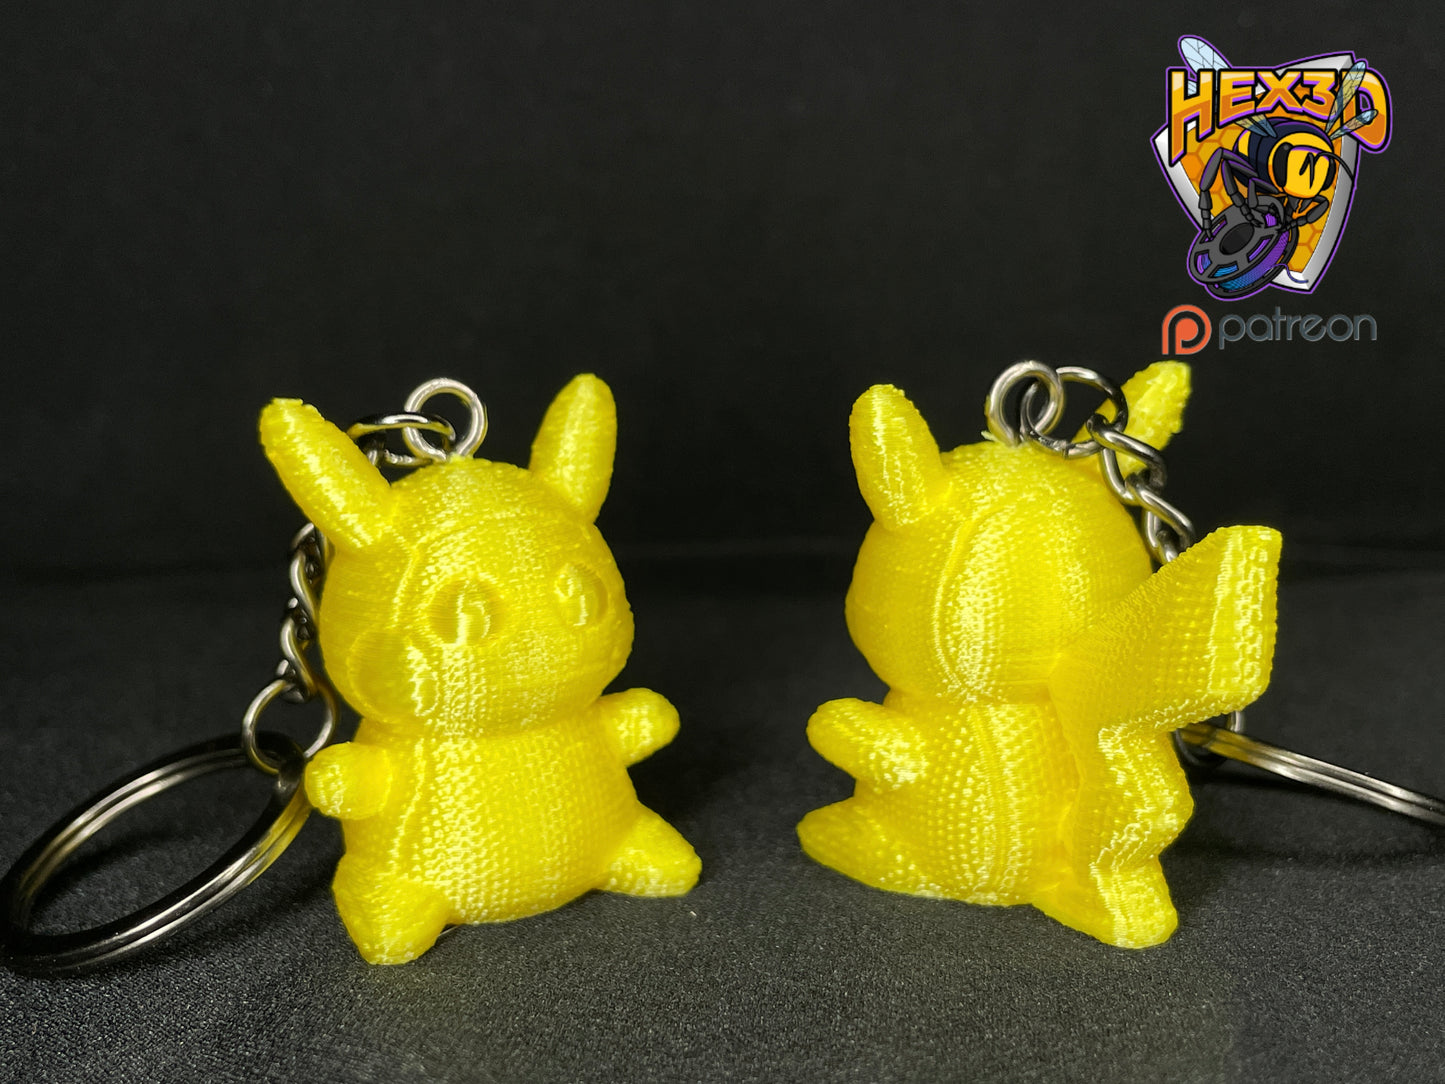 "Knitted" Pikachu Keychain by Hex3D